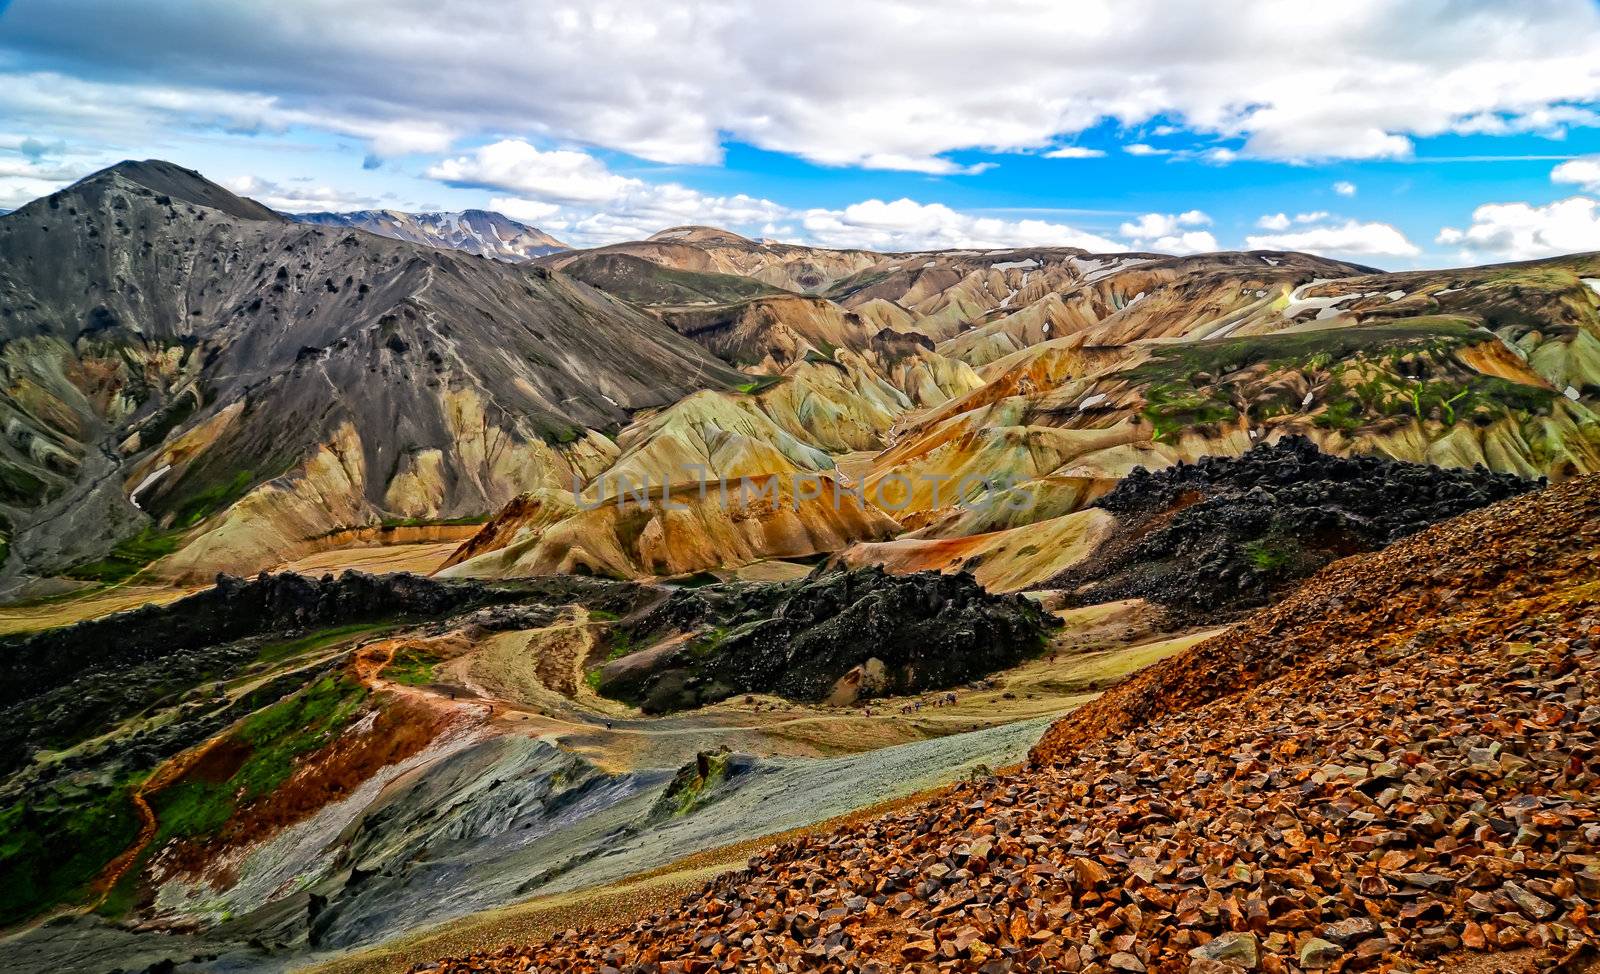 Landmannalaugar colorful mountains landscape view in Iceland